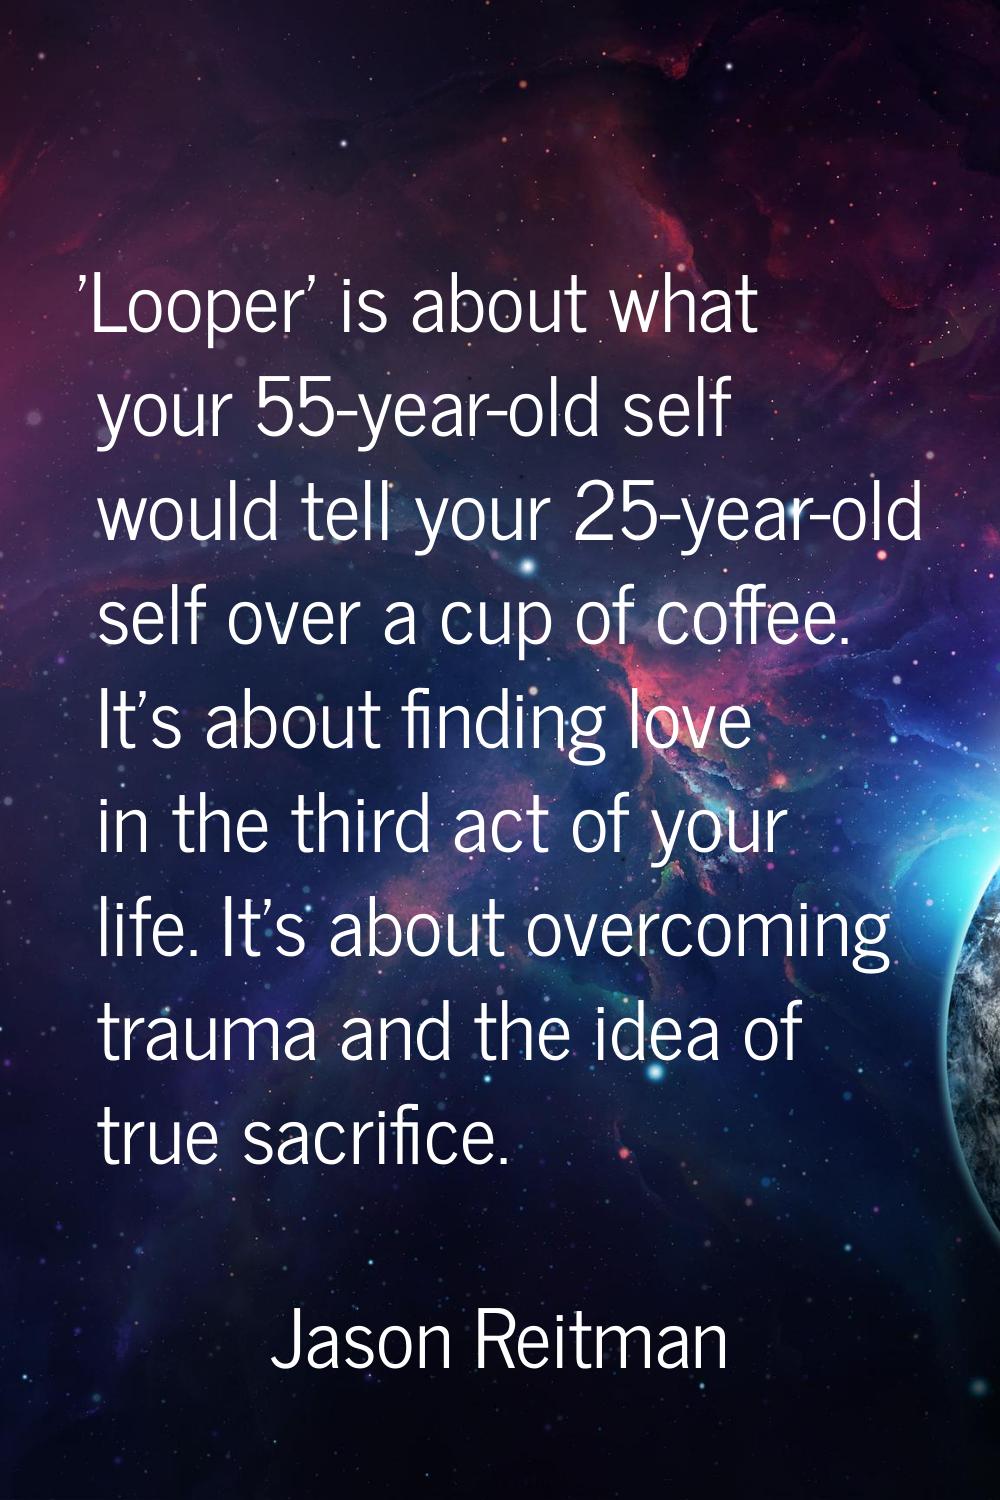 'Looper' is about what your 55-year-old self would tell your 25-year-old self over a cup of coffee.